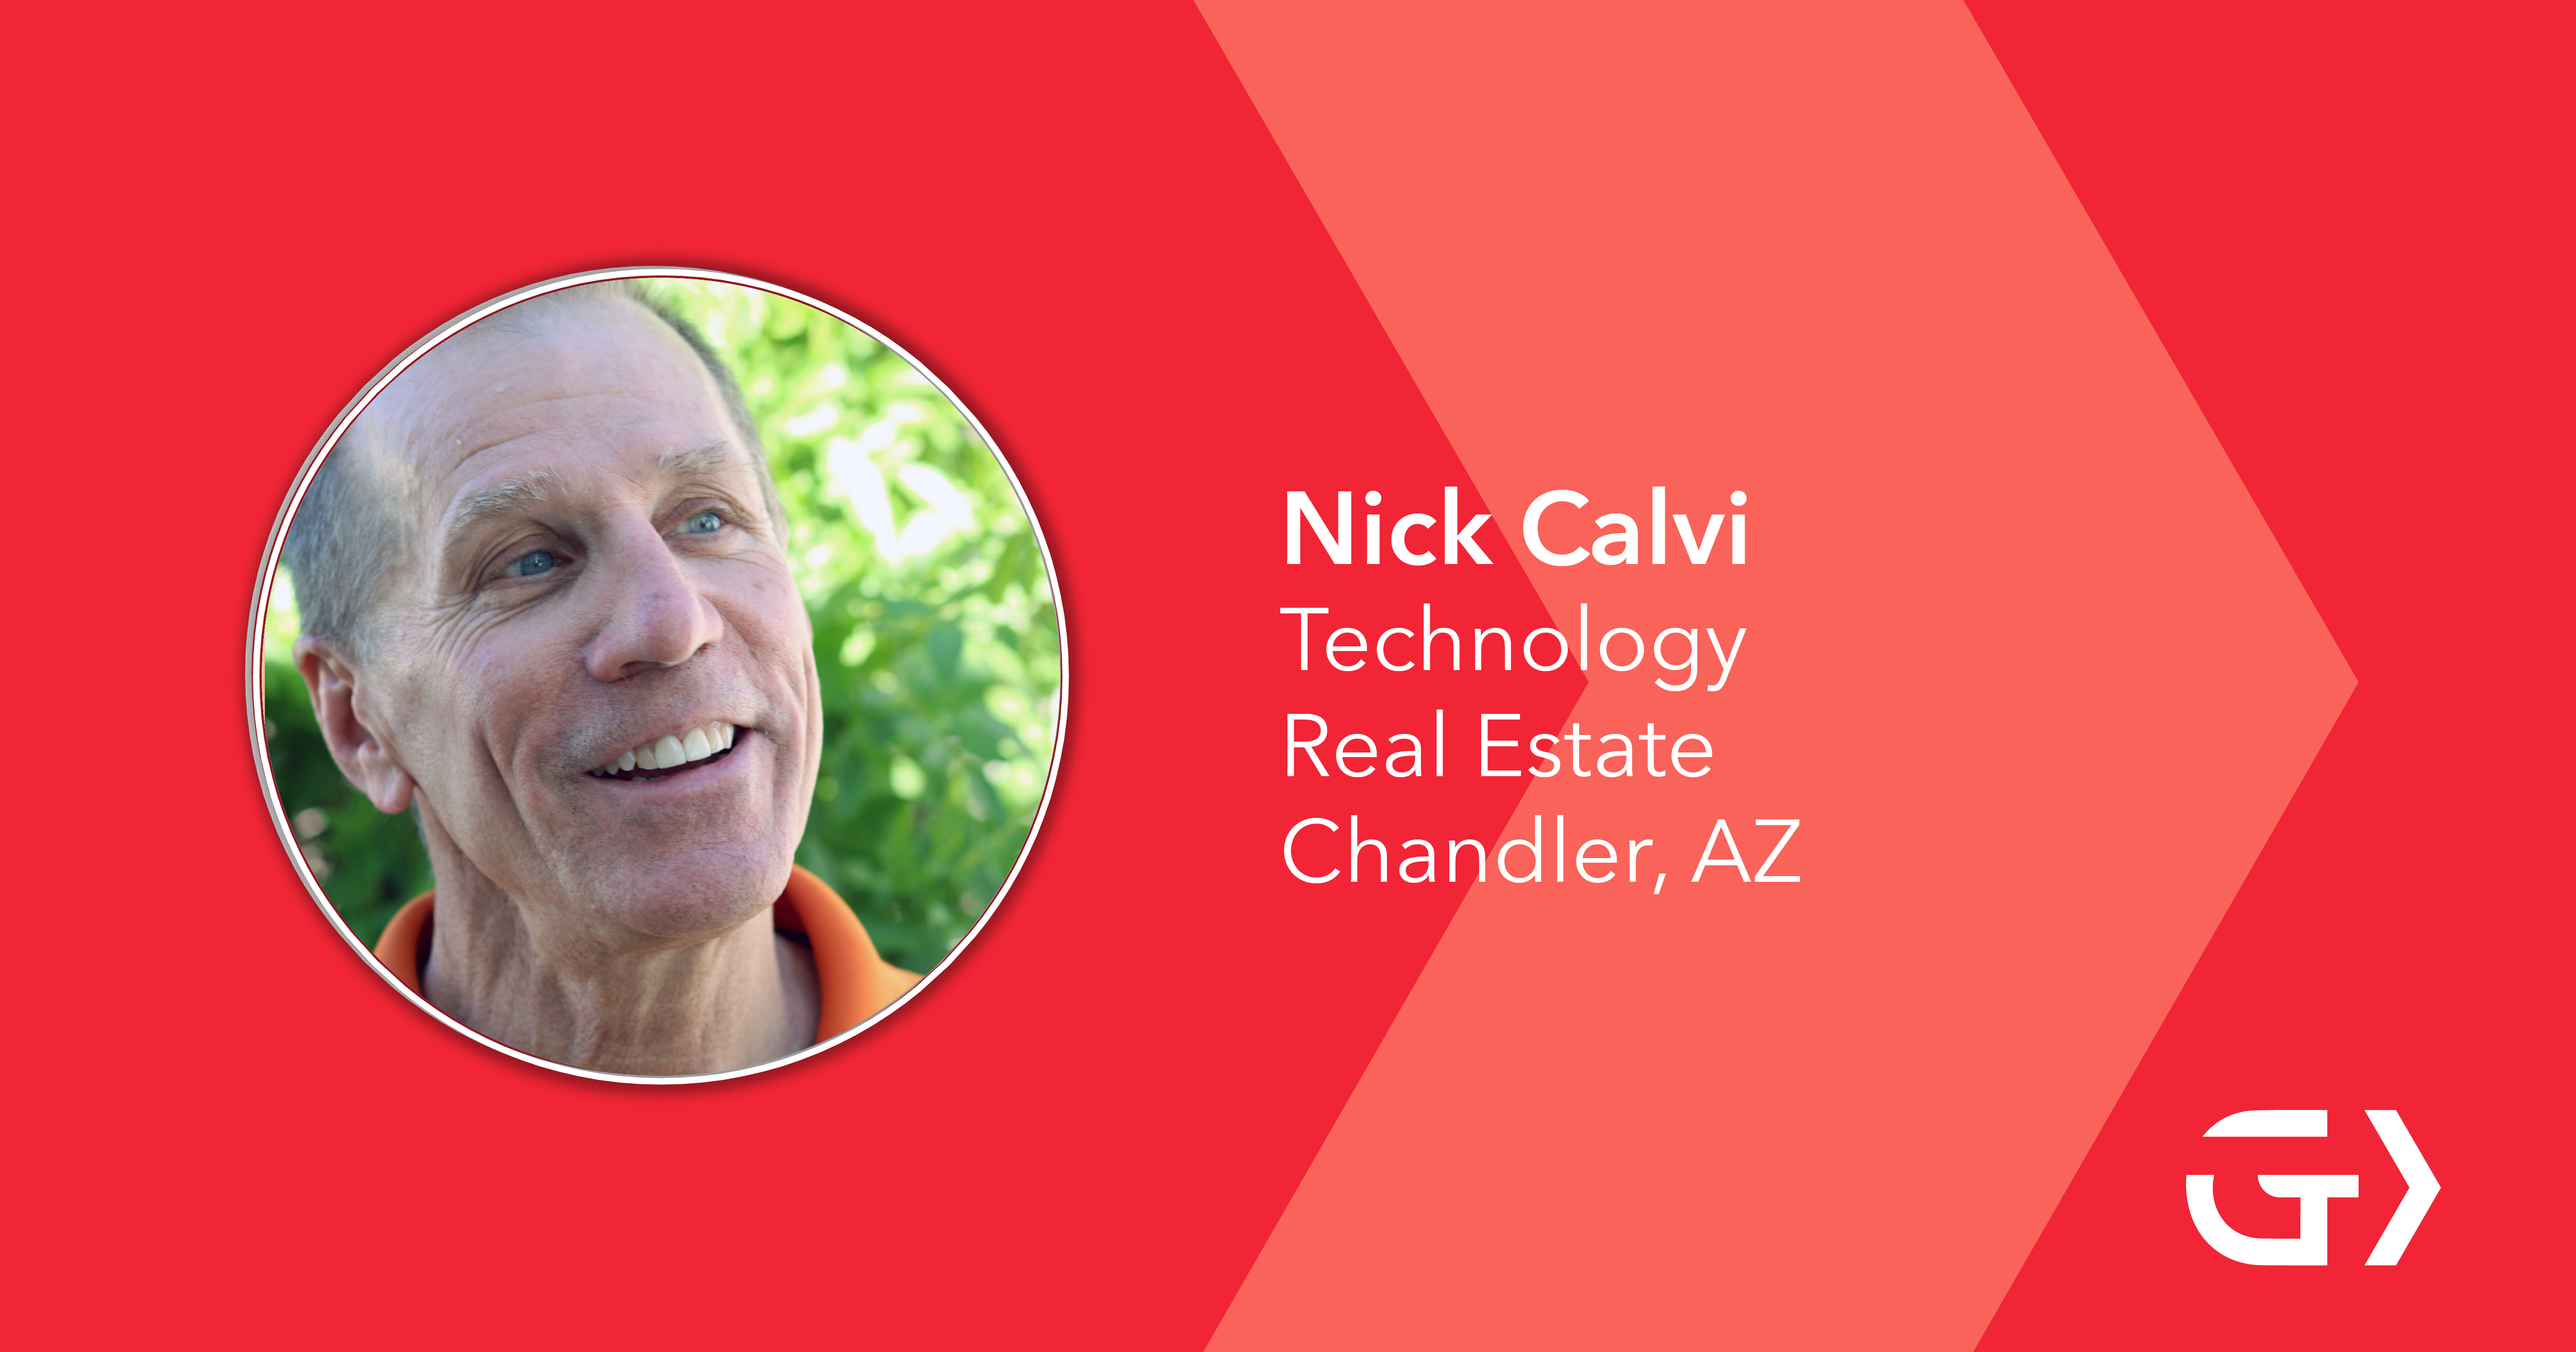 What do you love most about living in Greater Phoenix? Nick Calvi says he loves living in Greater Phoenix because of the weather, people and FREEways.